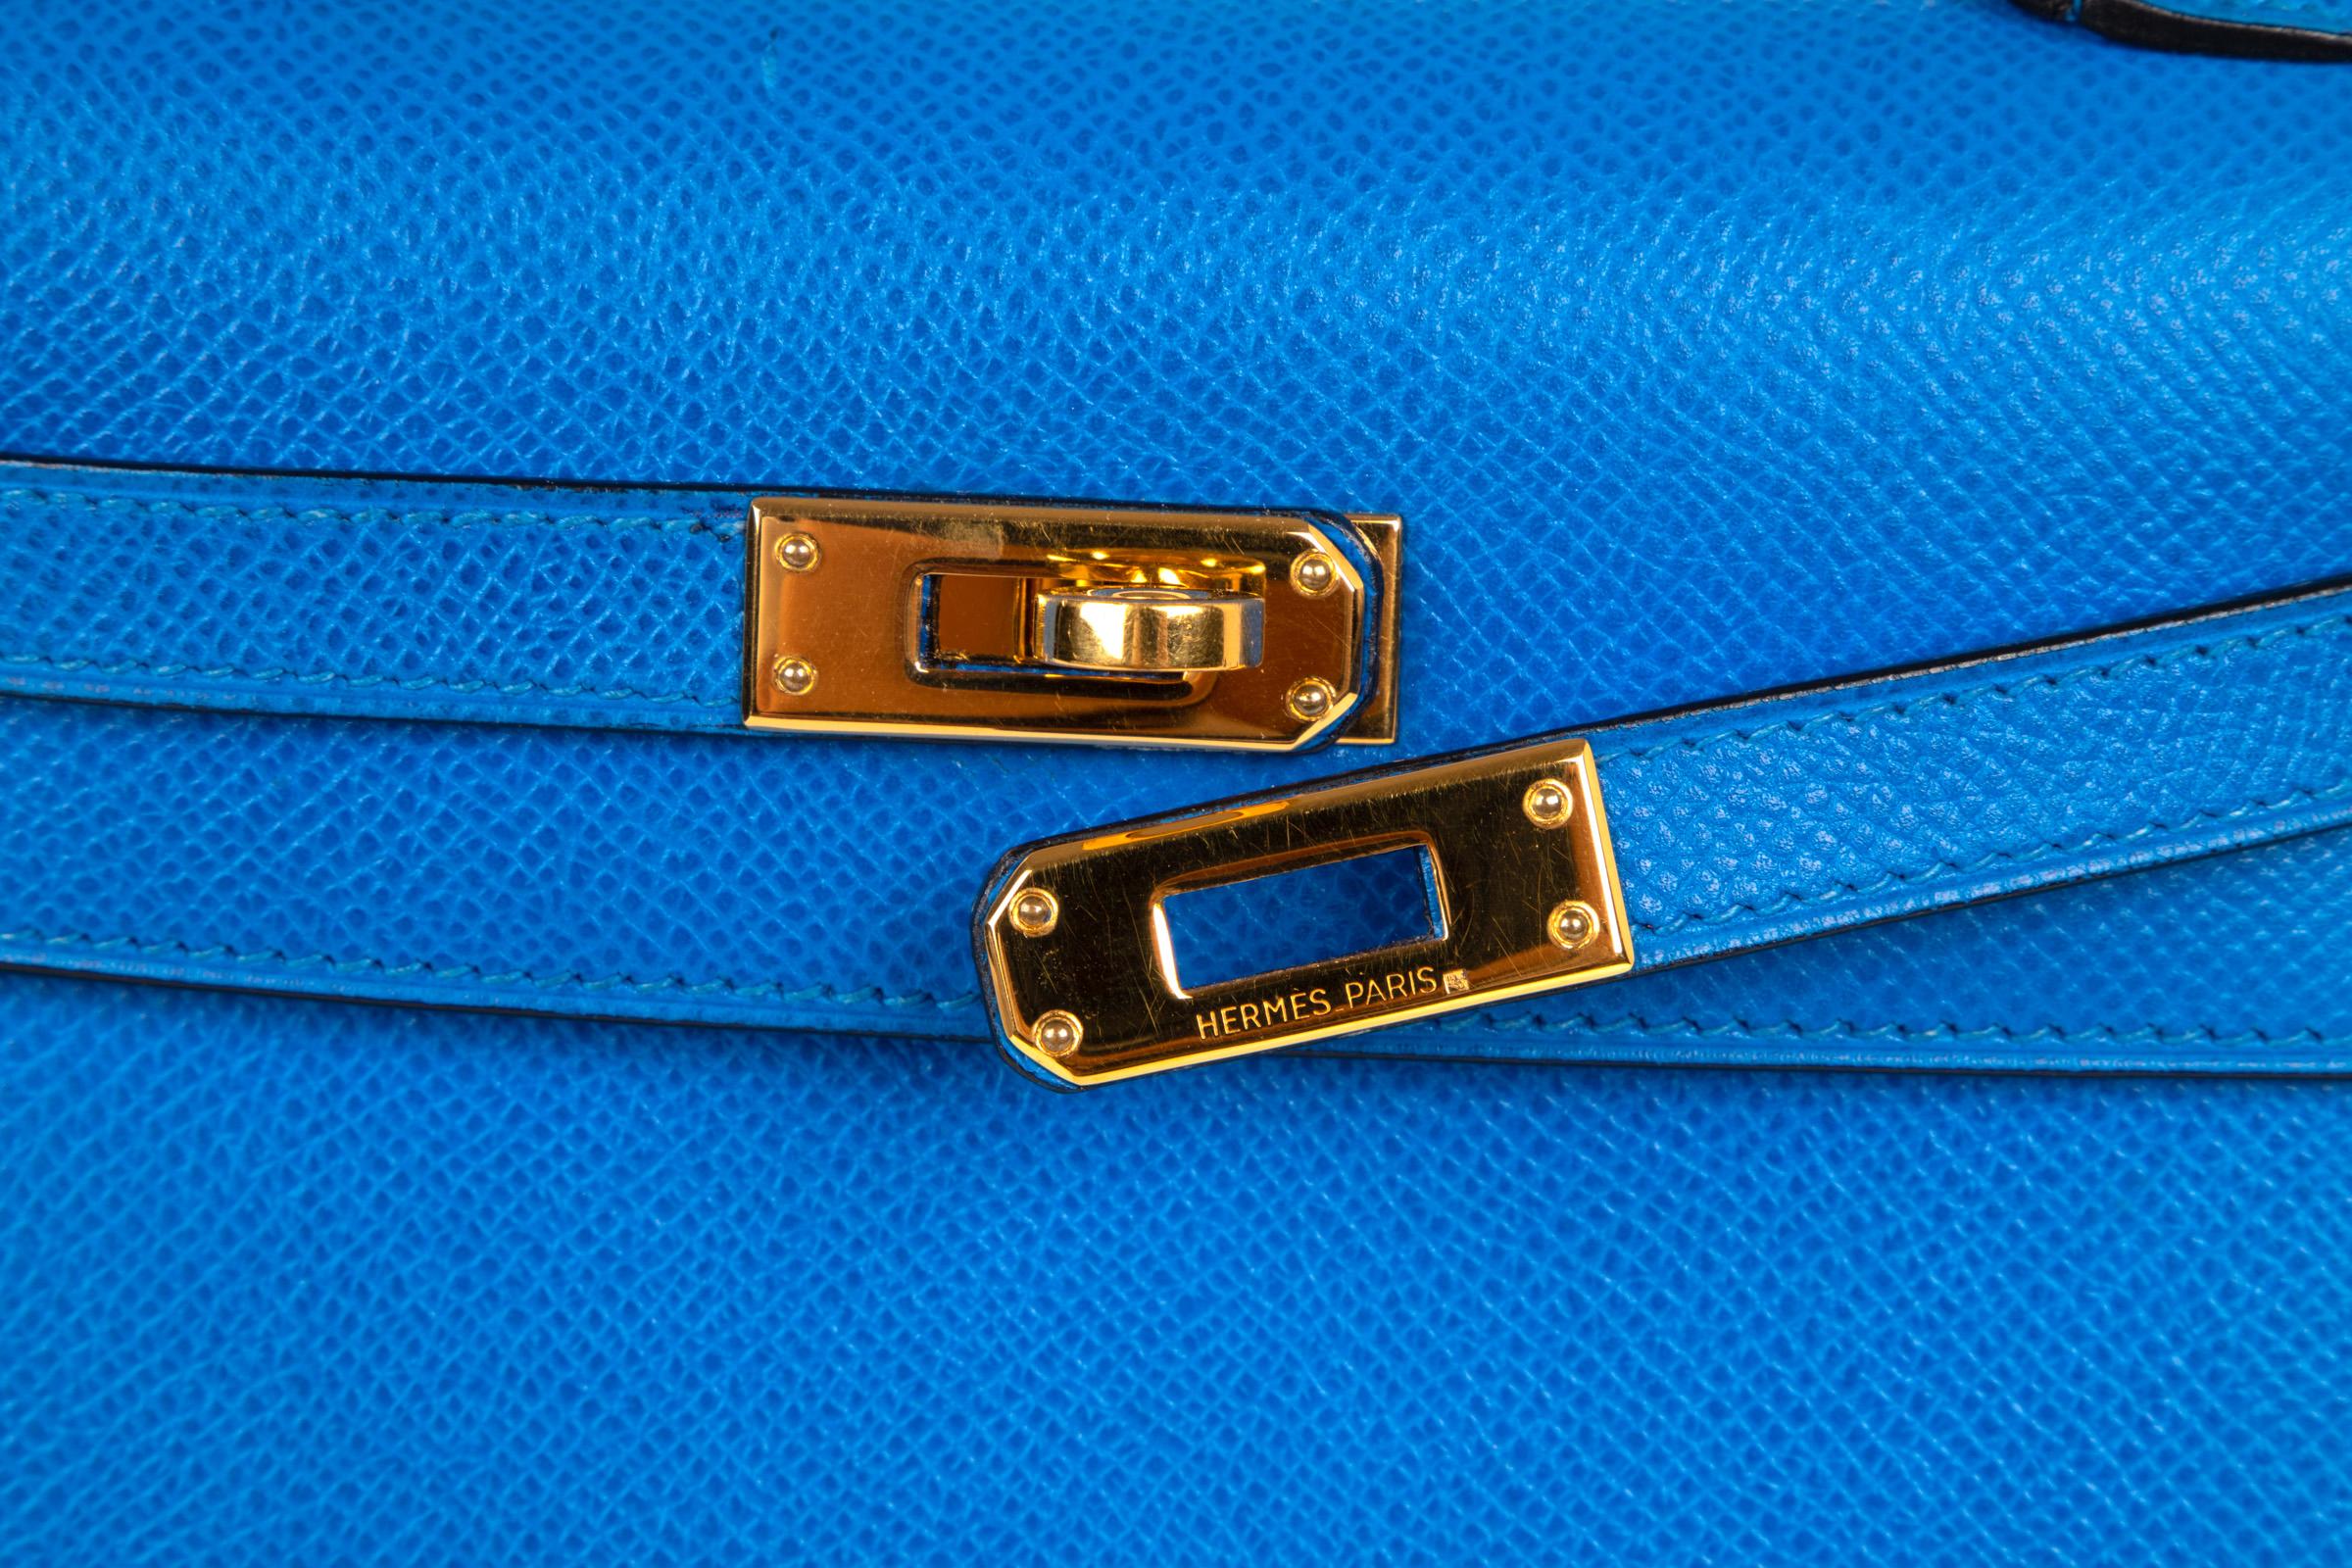 Guaranteed authentic Hermes insanely beautiful mini Vintage 20cm Hermes Kelly Sellier in rare Blue de France.
Courchevel leather and regal with gold hardware.
Rare to find and no longer produced, this beauty is a collectors treasure.
Clean interior,